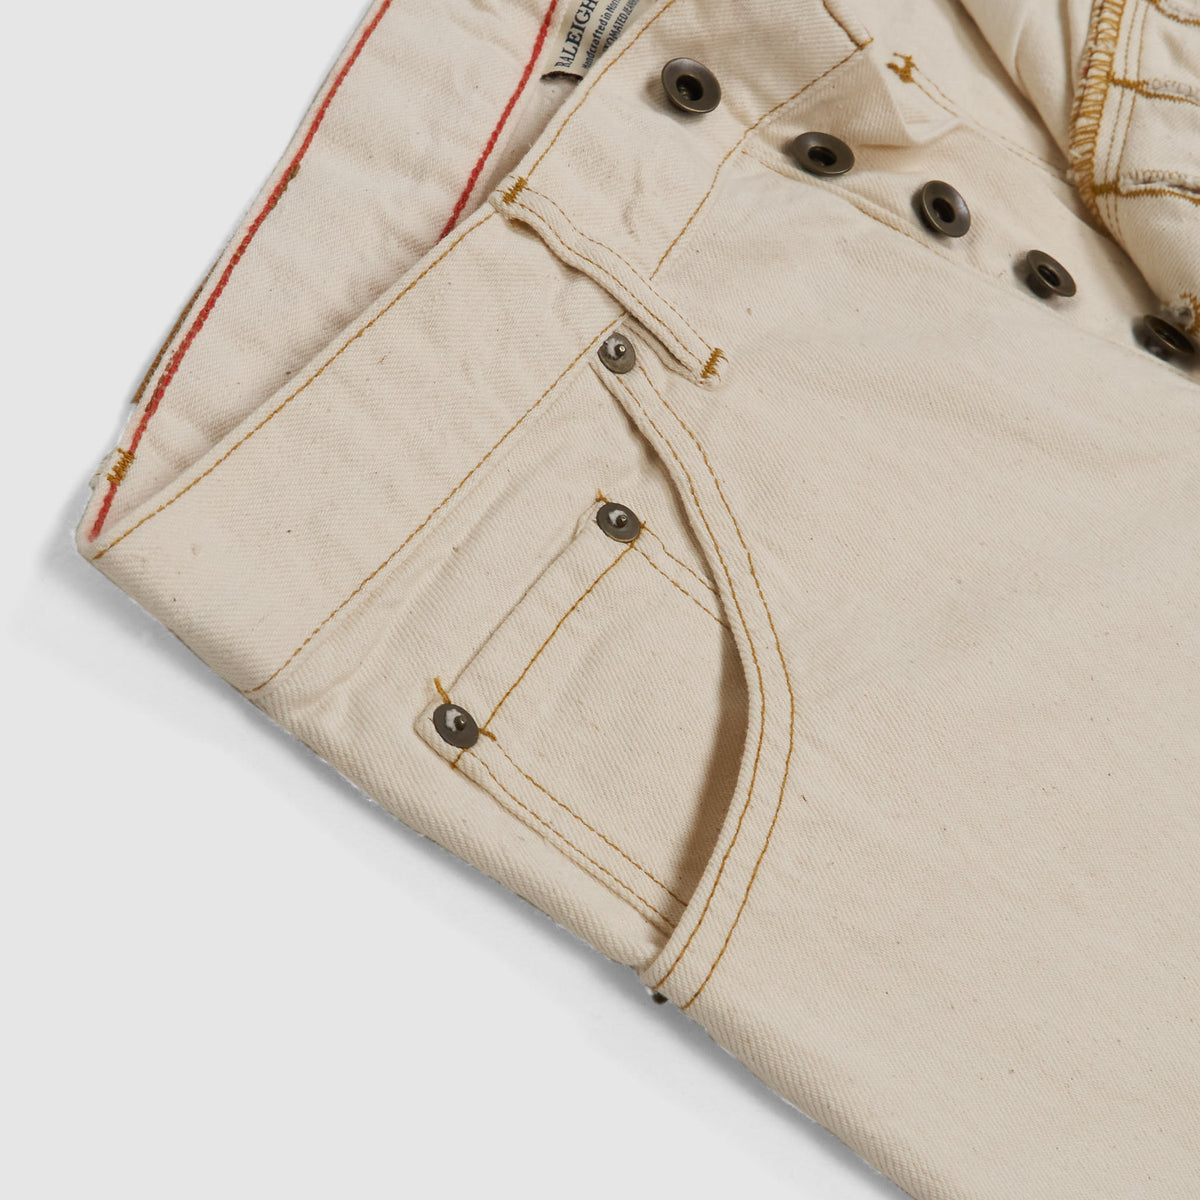 Raleigh Denim Workshop Classic Fit Natural Twill Jeans